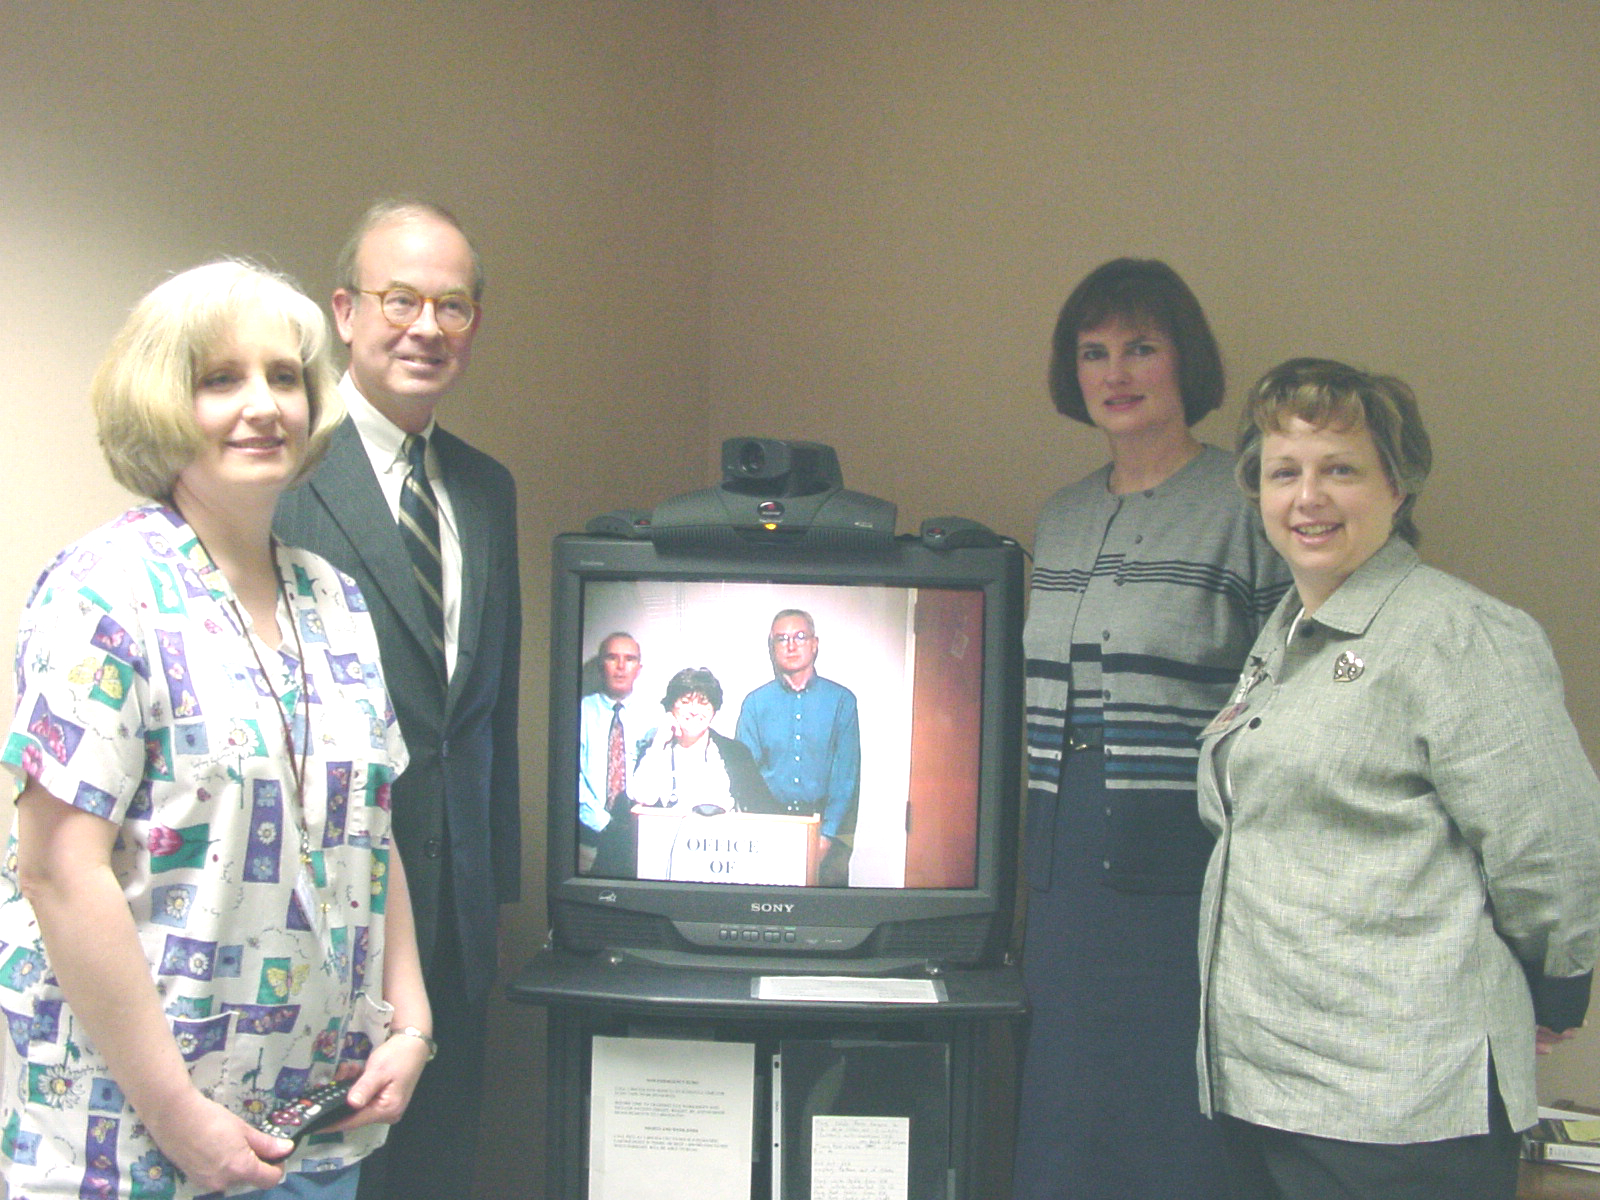 Rick Boucher and group stands next to a television.